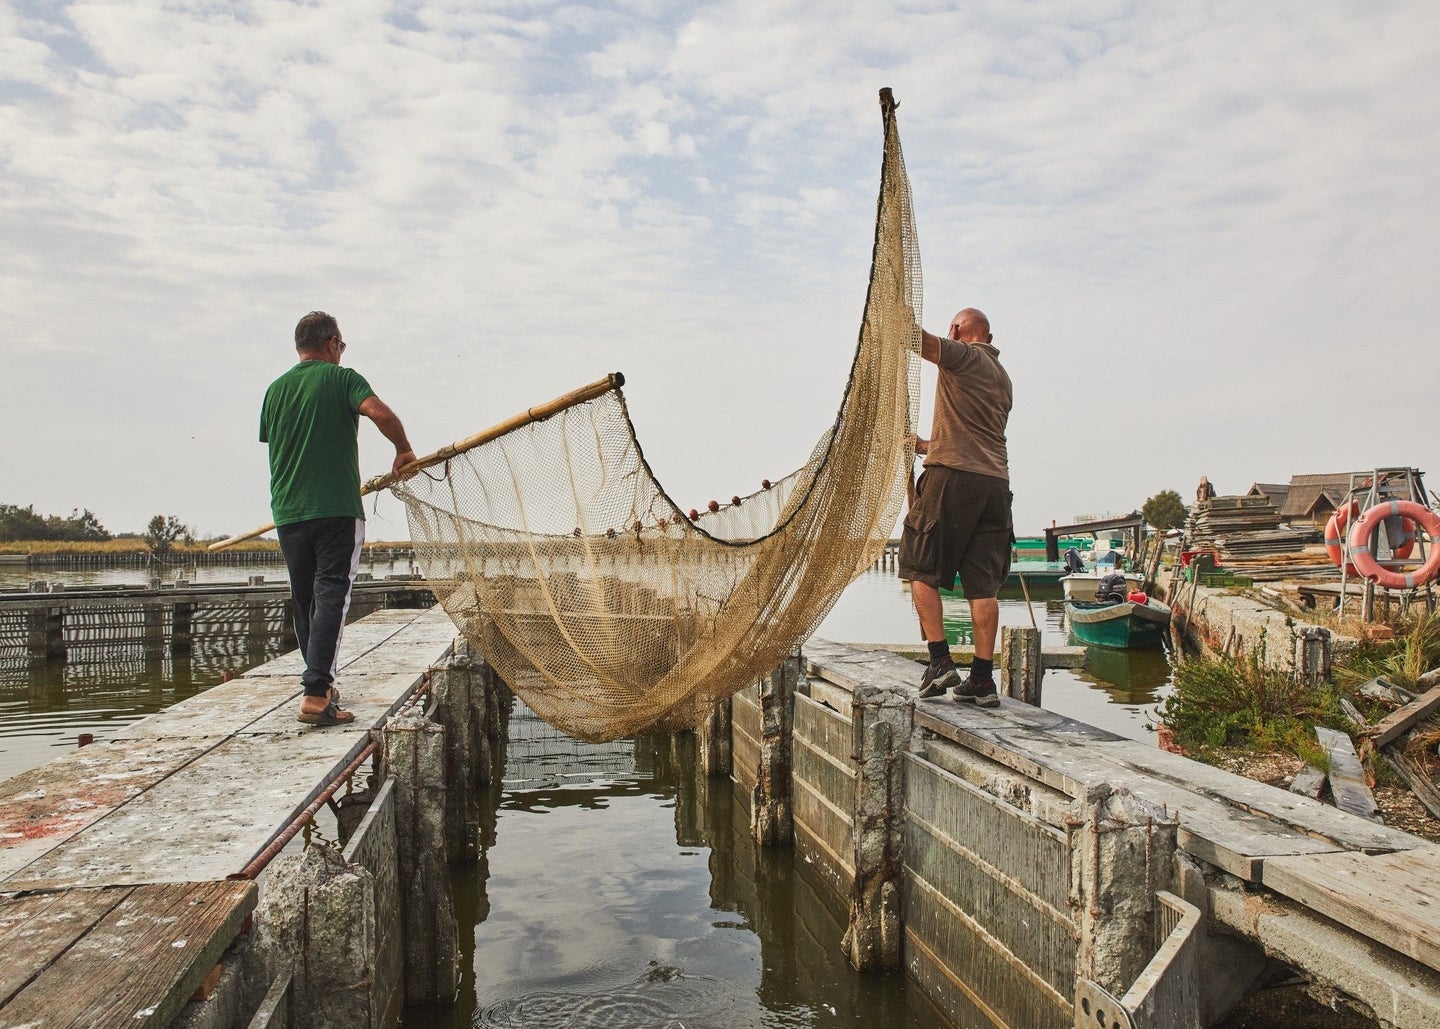 Fishers lowering an eel trawling net into a canal in Comacchio, Italy